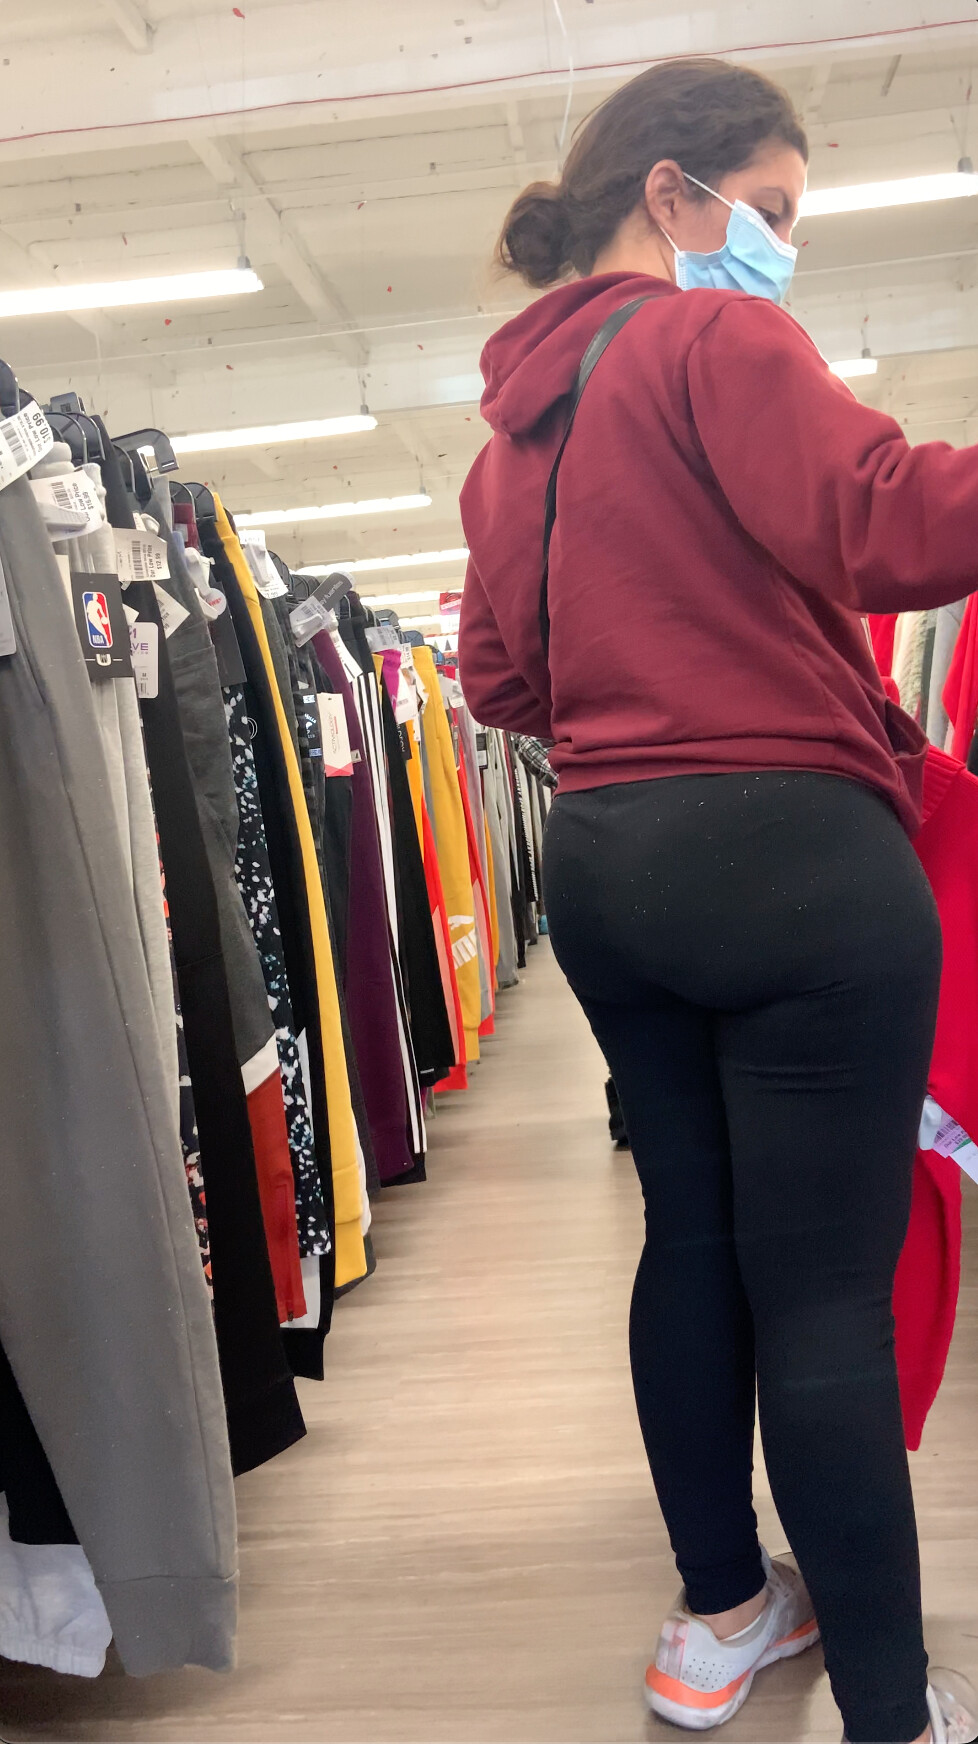 OC. Thick BBL latina. Side and back angles 🥵 - Tight Jeans - Forum